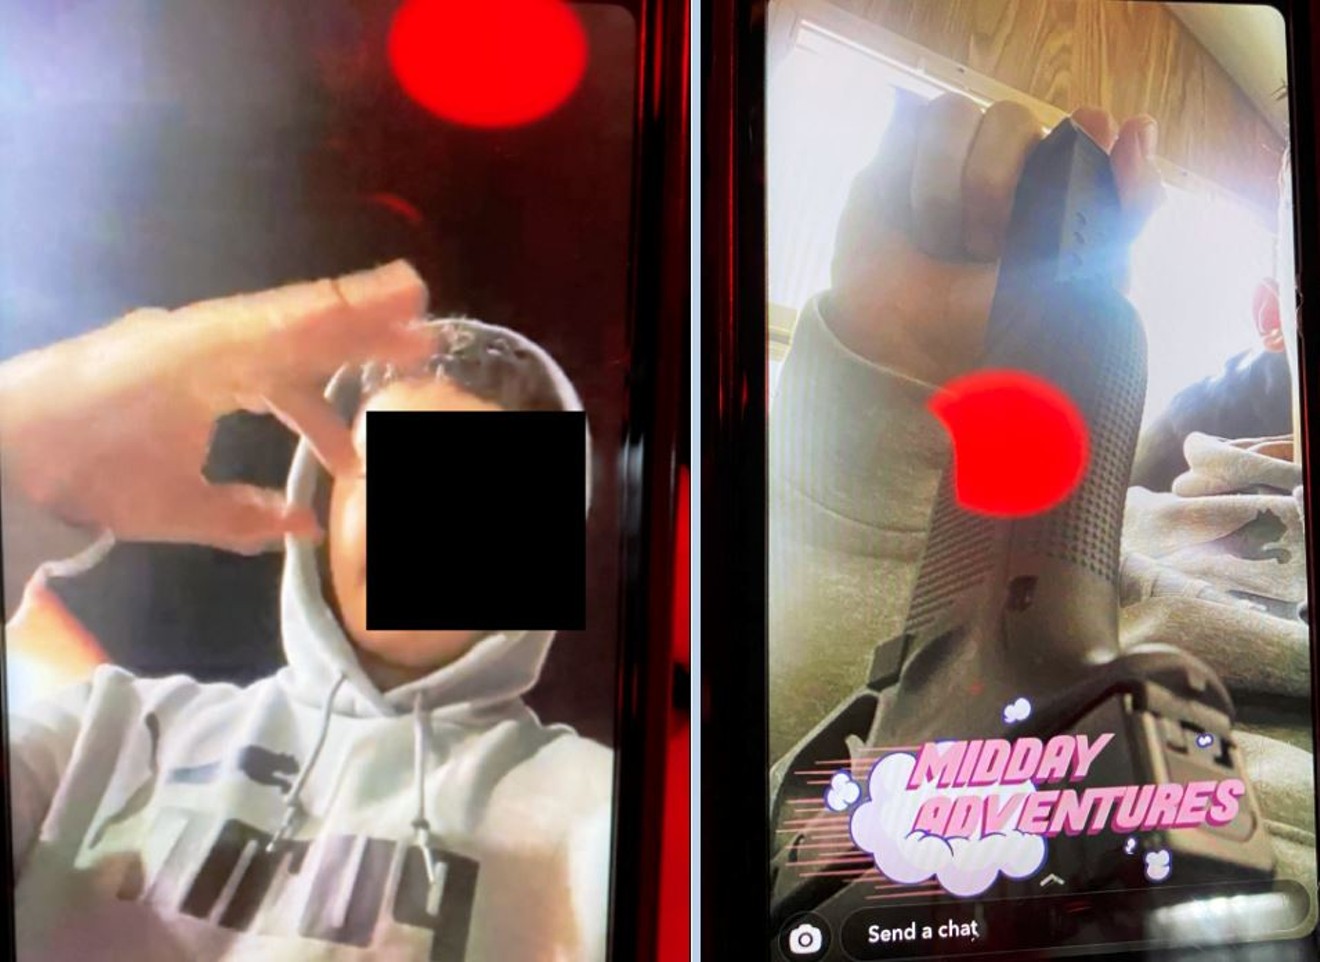 Anthony Cano displayed a common Chandler gang sign and his illegal Glock on Snapchat hours before a police officer shot him. (Cano's face was redacted by Chandler PD).